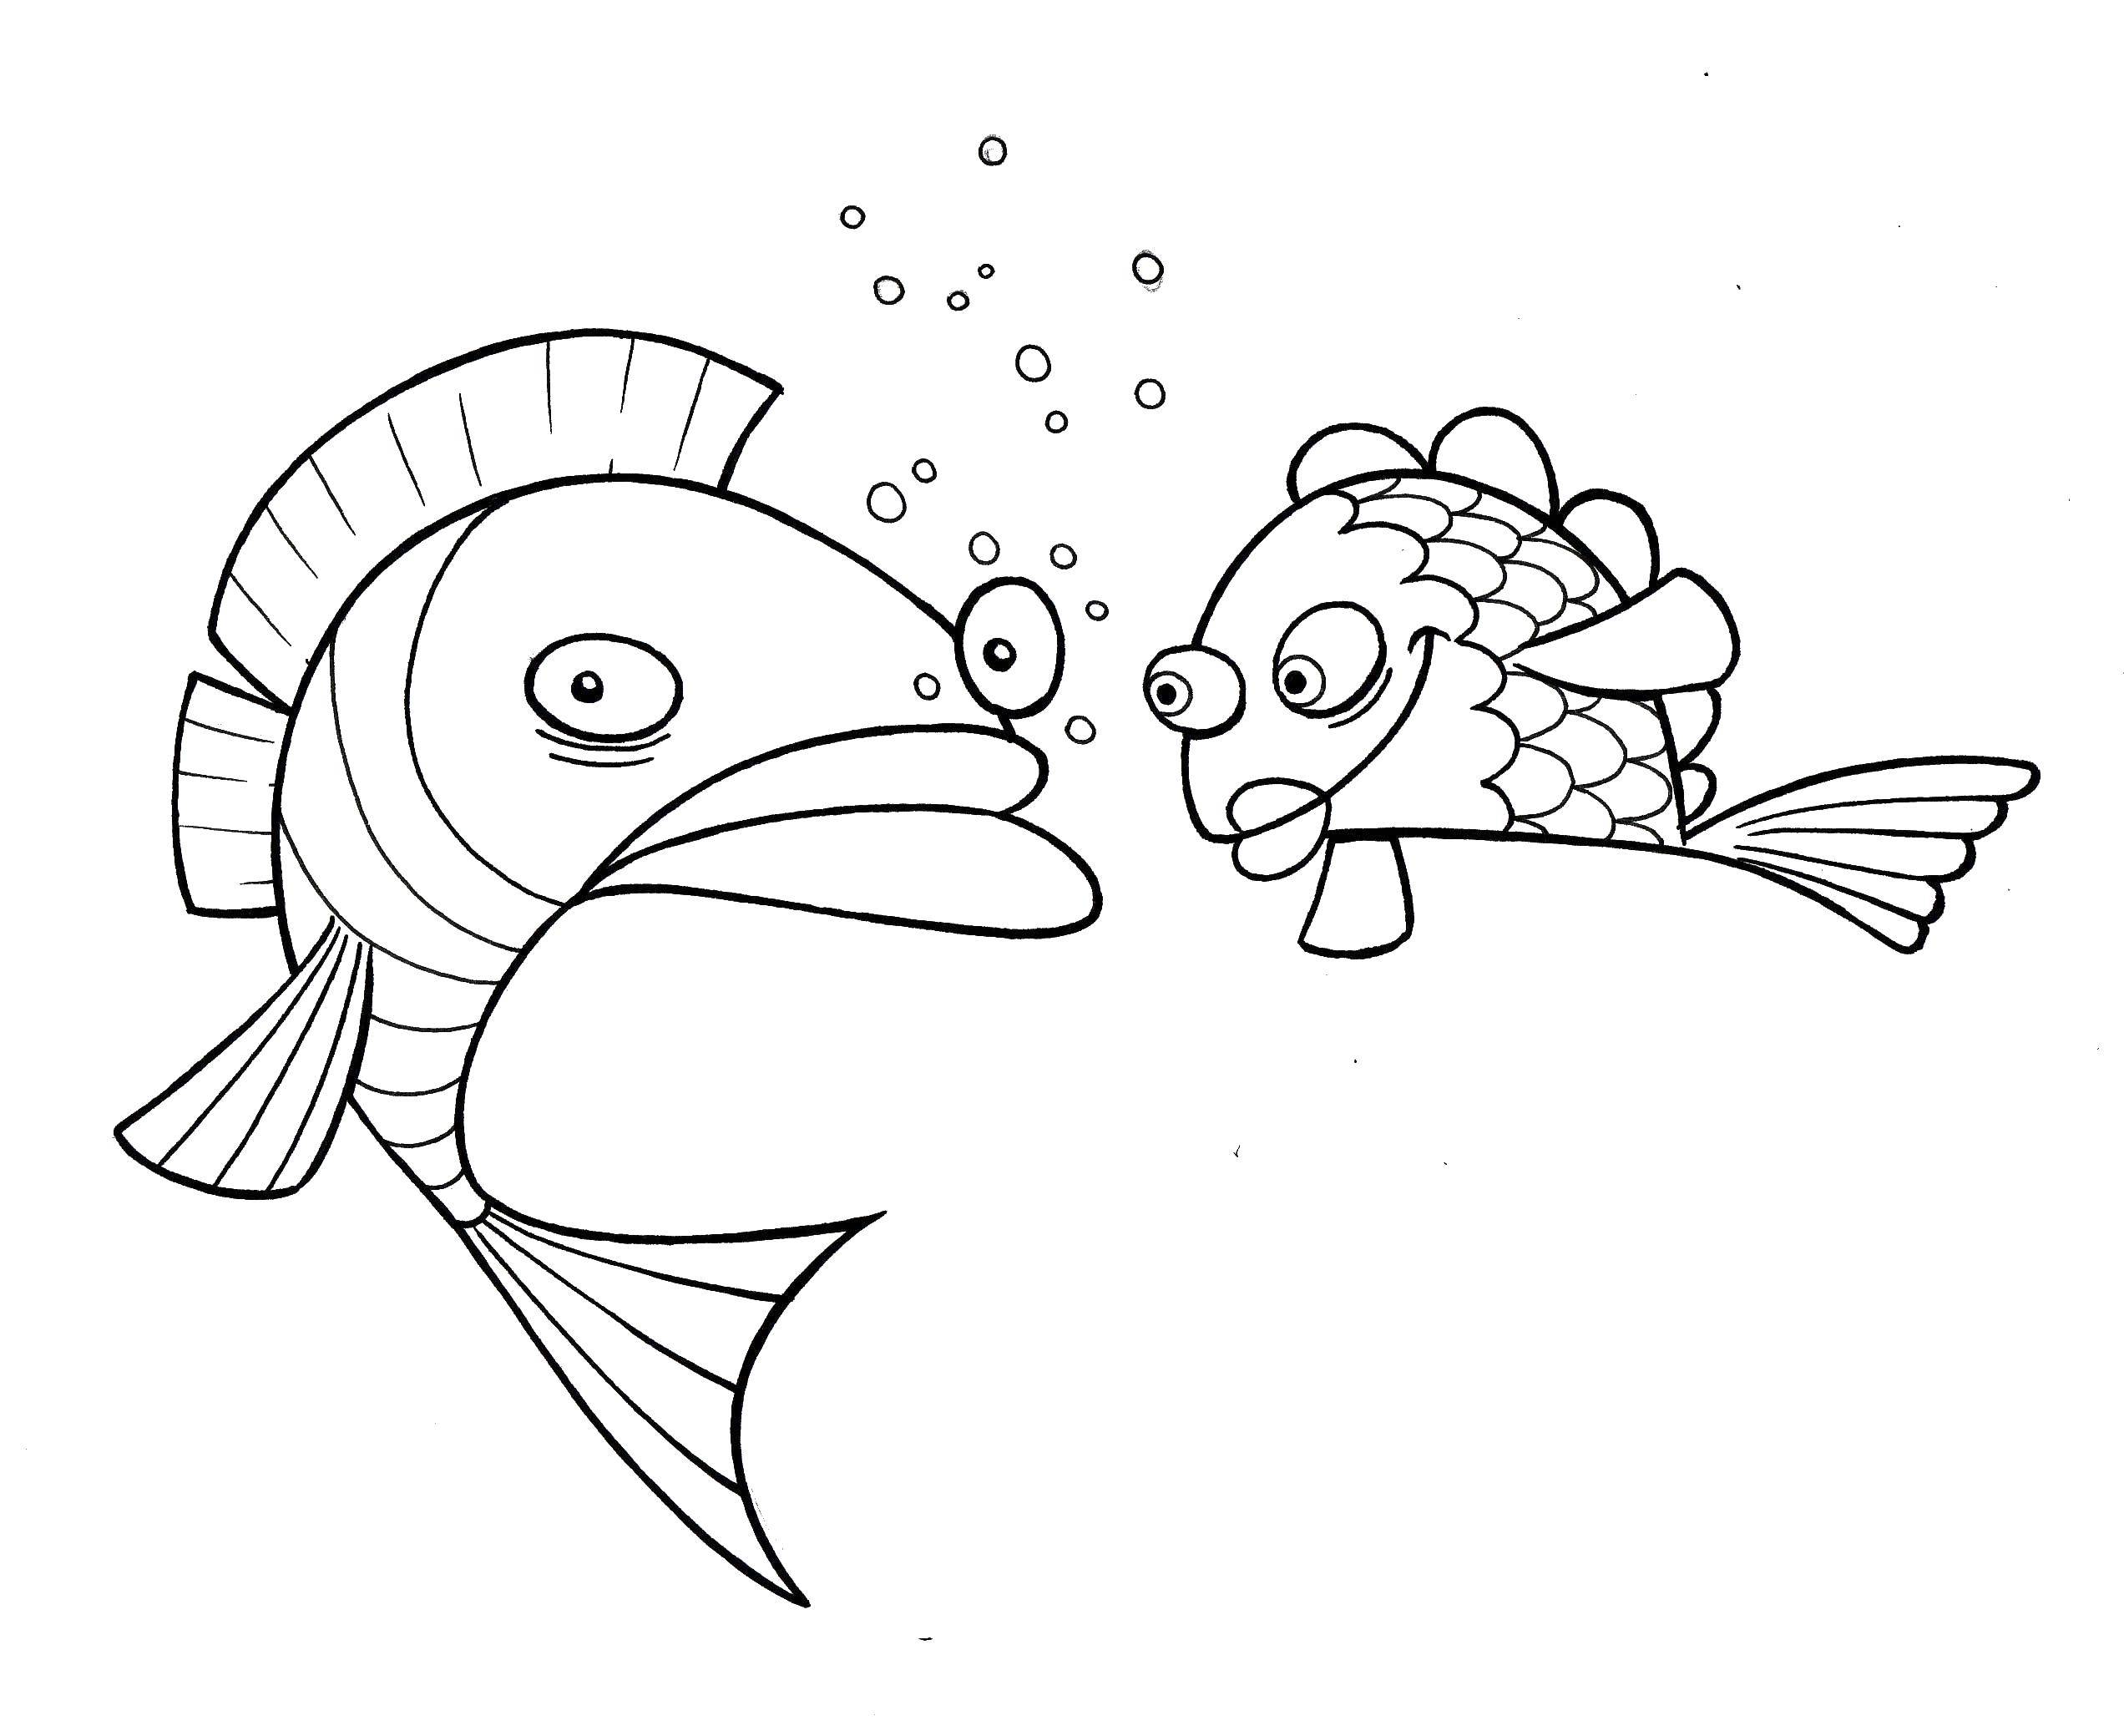 Coloring Funny fish. Category fish. Tags:  Underwater world, fish.